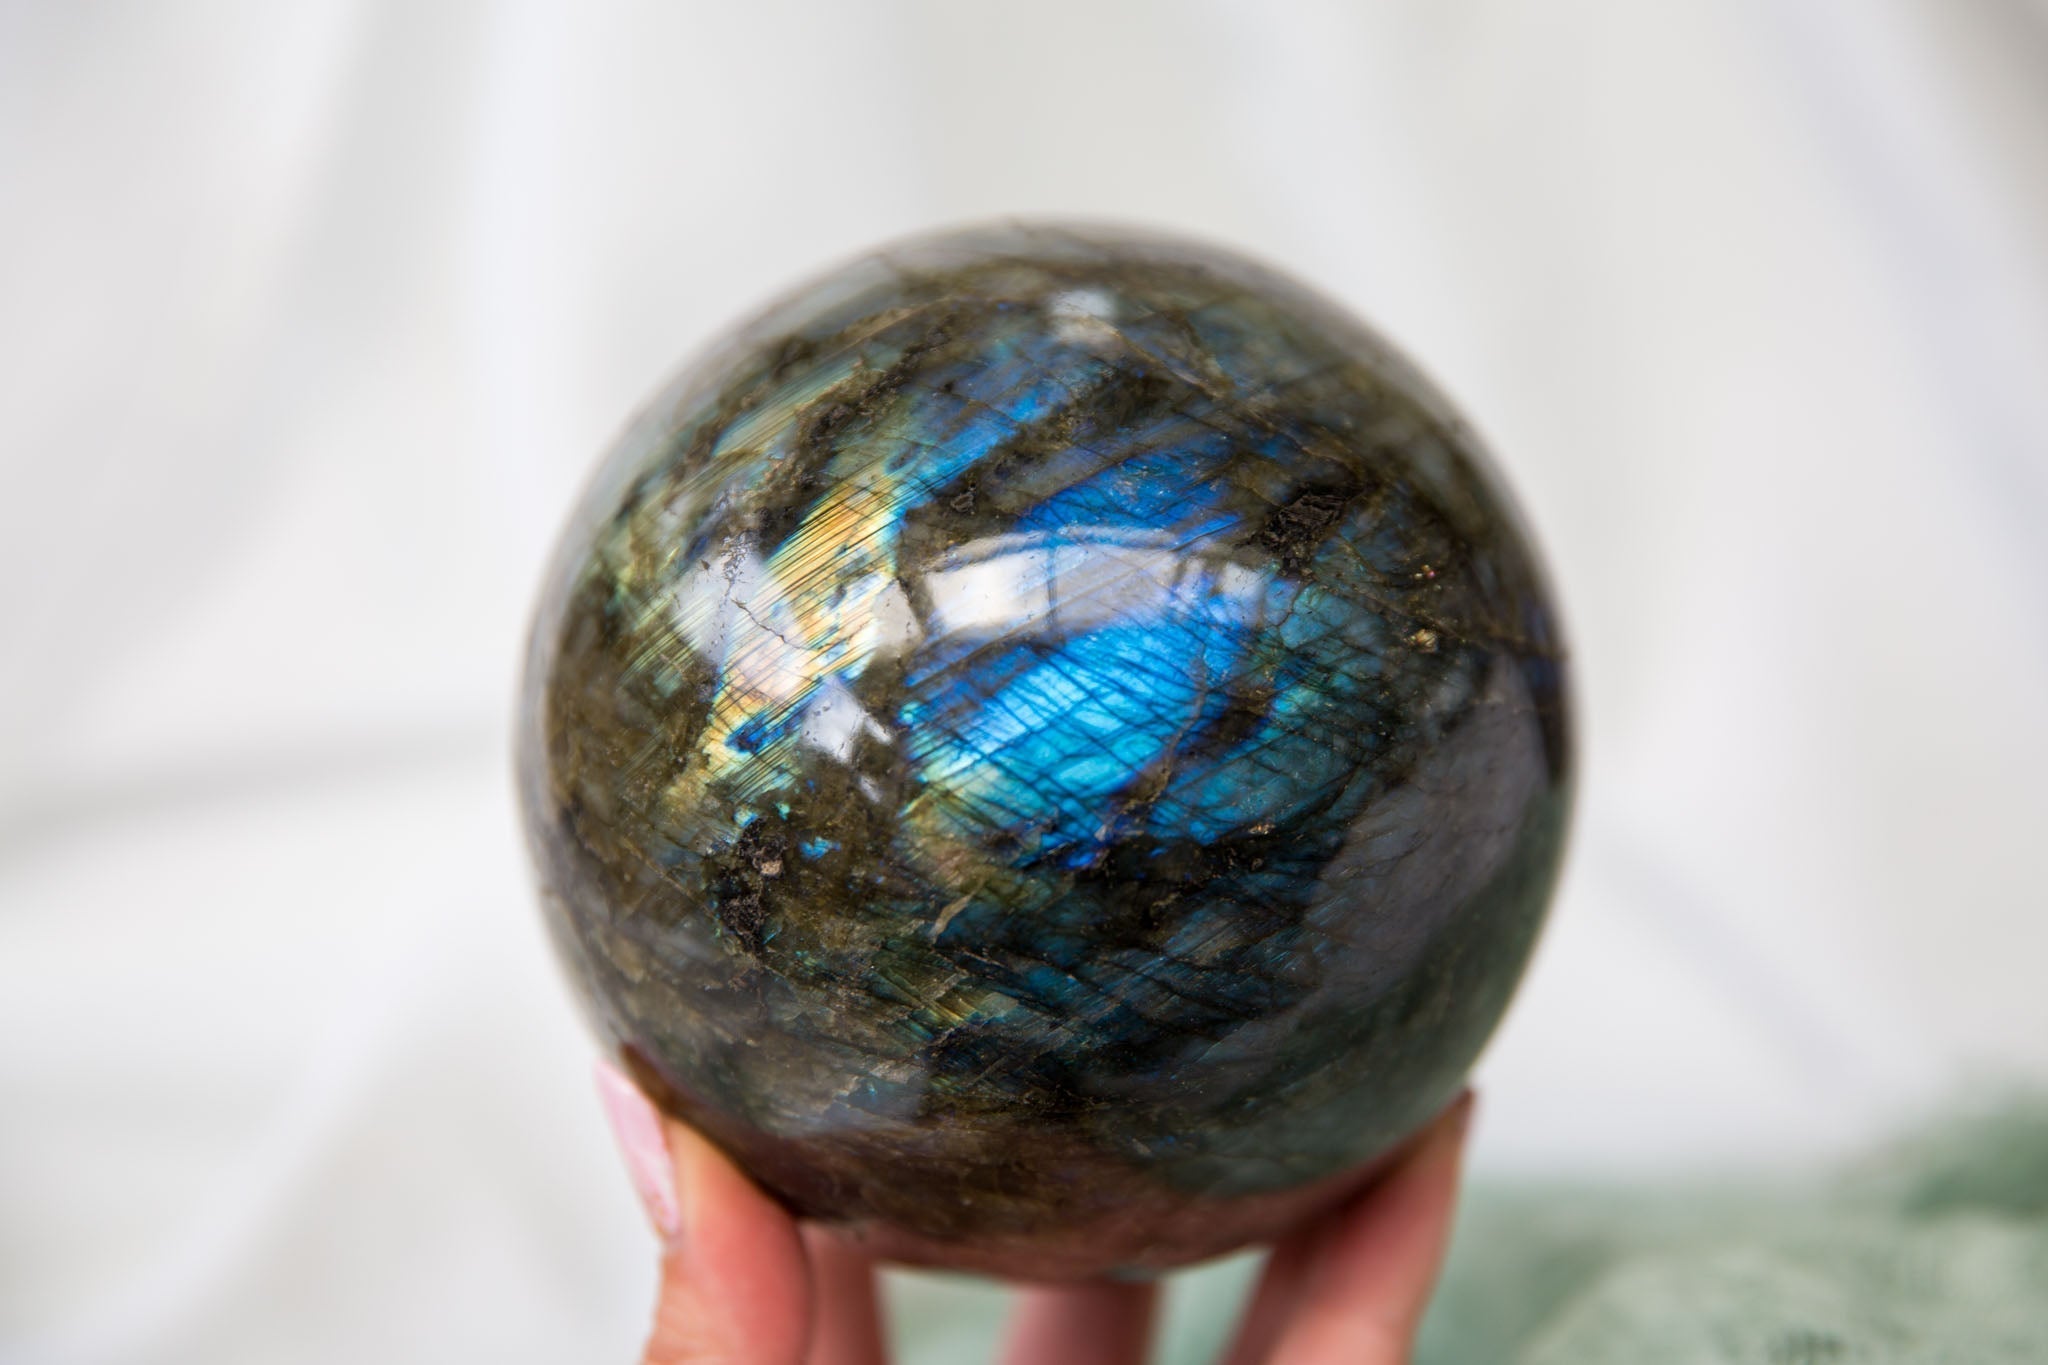 Labradorite Sphere #2 - Premium Crystals + Gifts from Clarity Co. - NZ's Favourite Online Crystal Shop